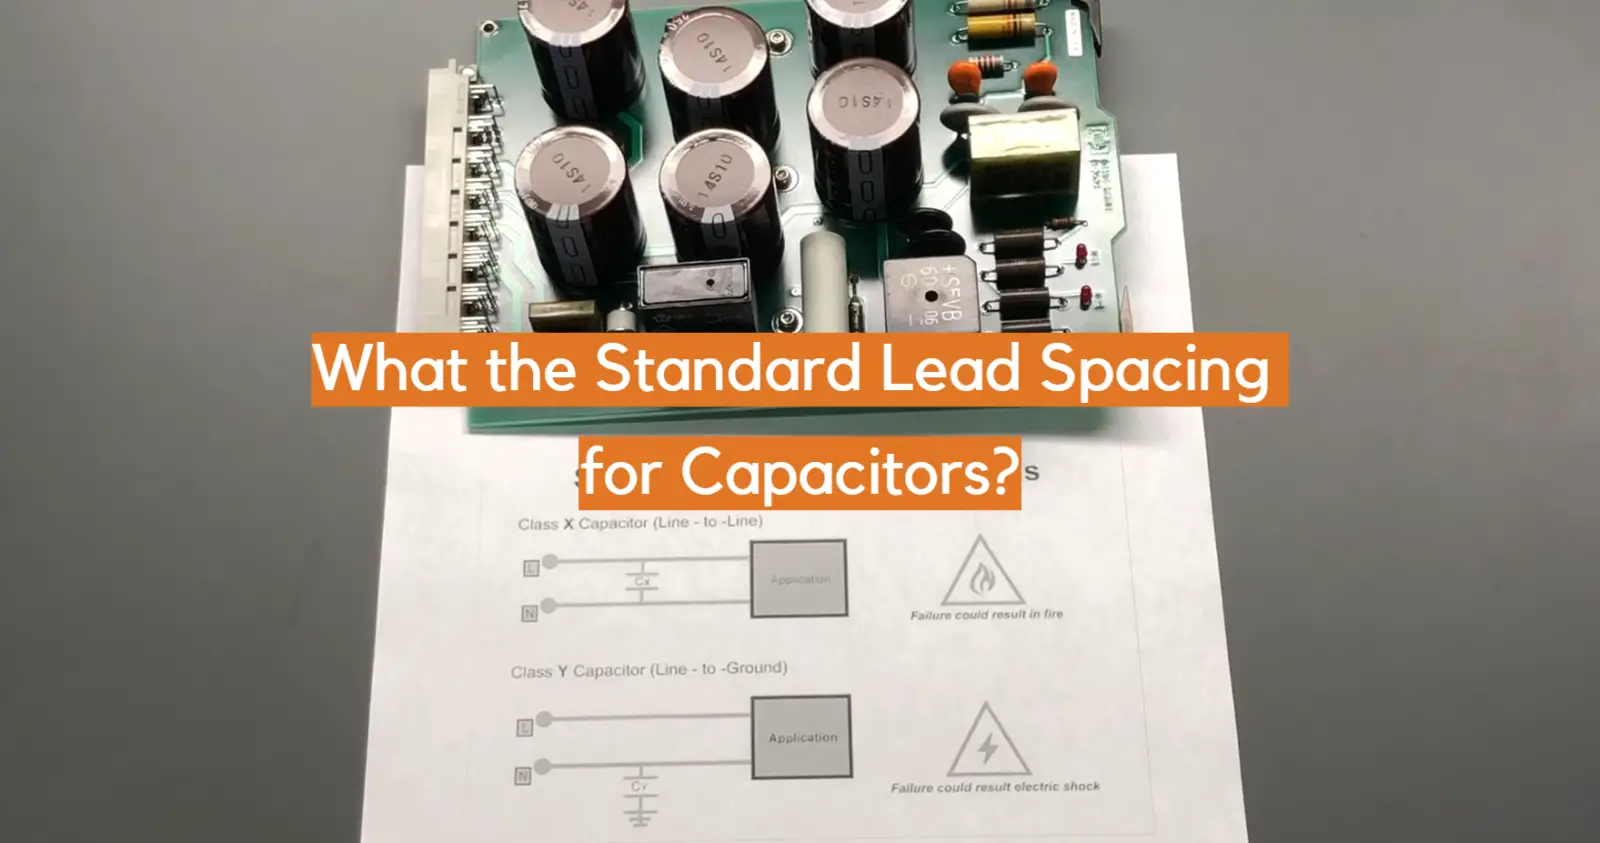 What the Standard Lead Spacing for Capacitors?